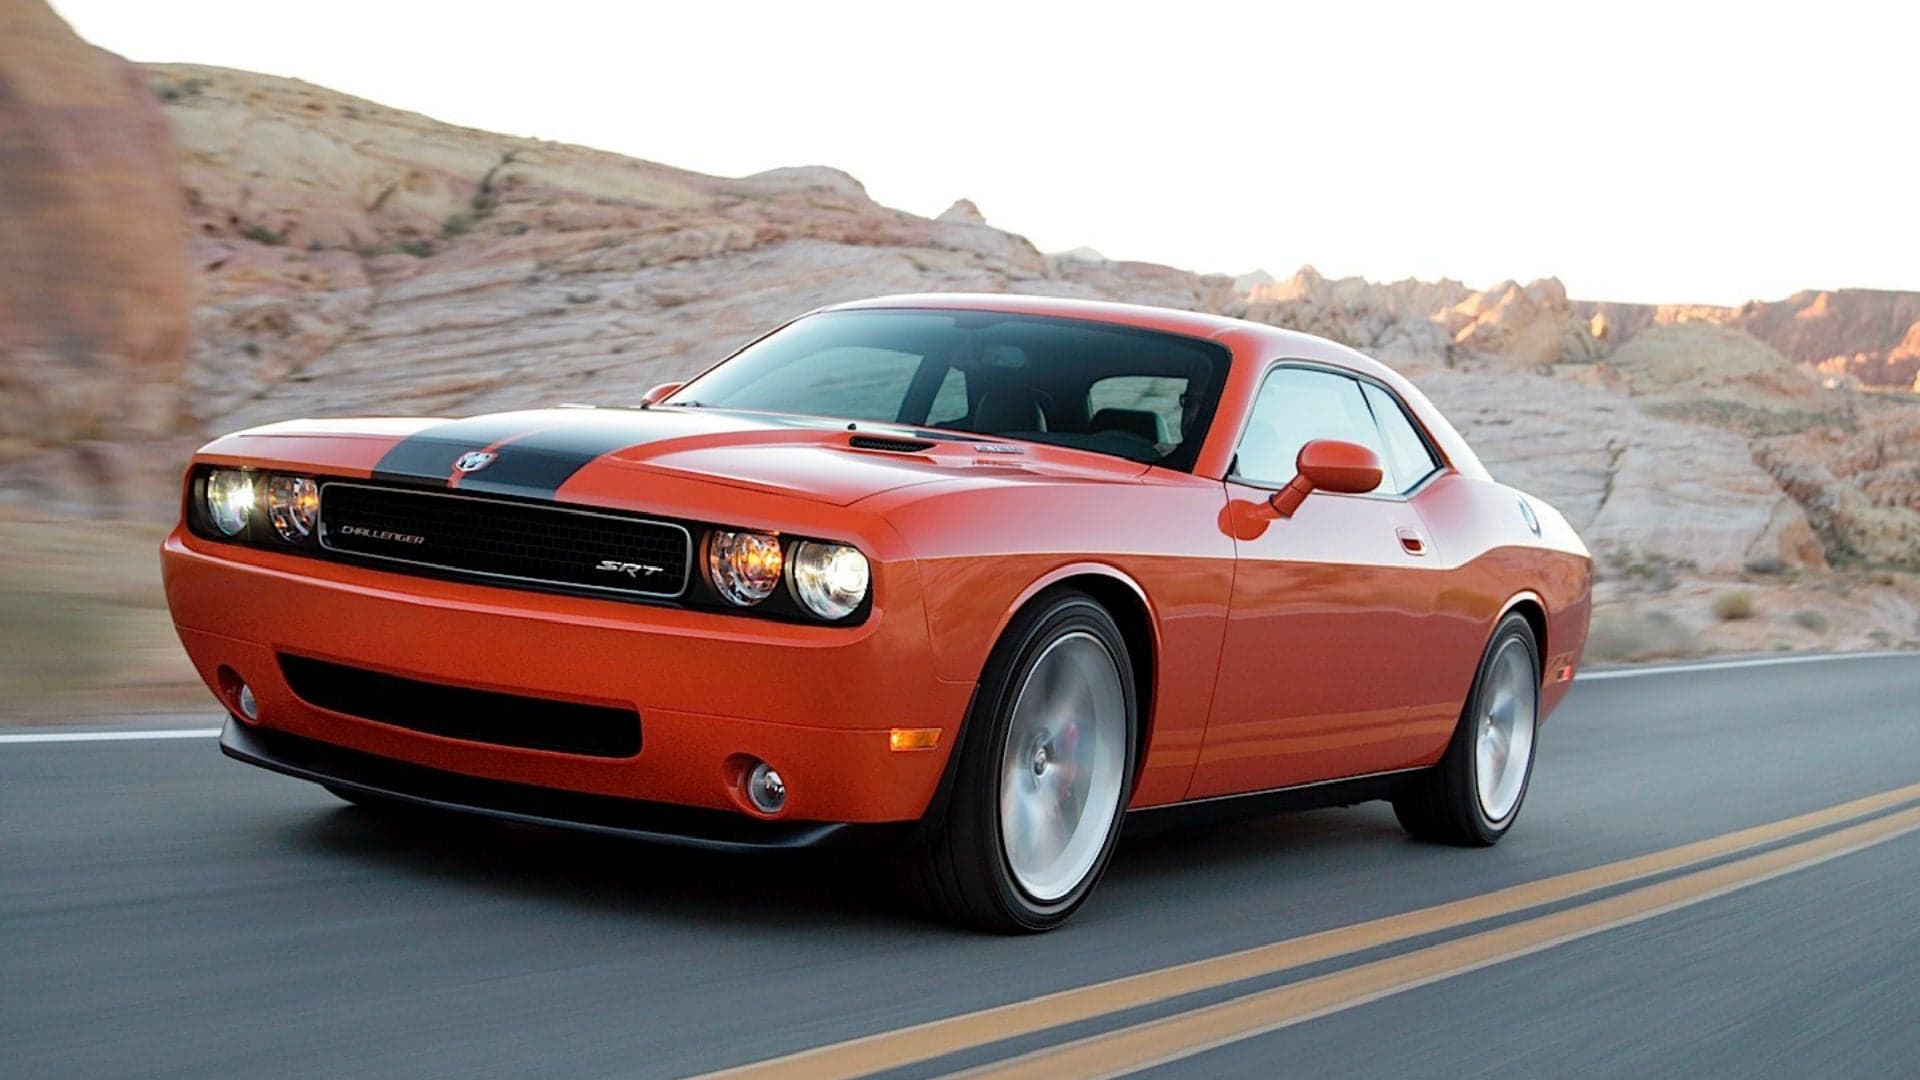 Dodge Challenger Driver Discovers Doing 145 in a 65 Will Get You Arrested Every Time